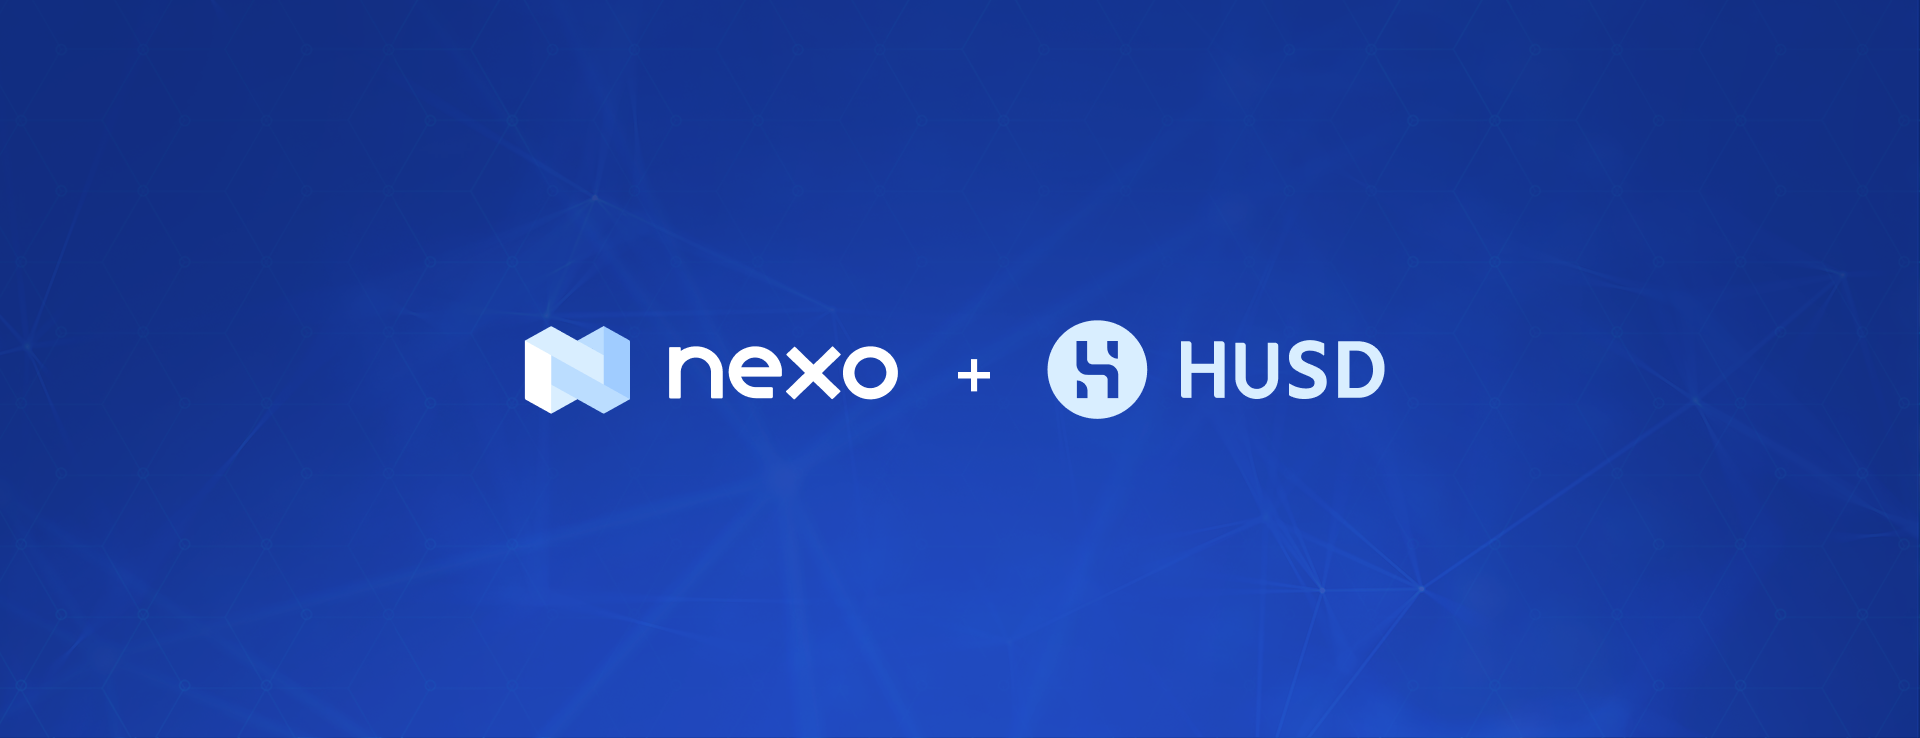 Leading Crypto Lender Nexo Expands Its Core Offering with HUSD